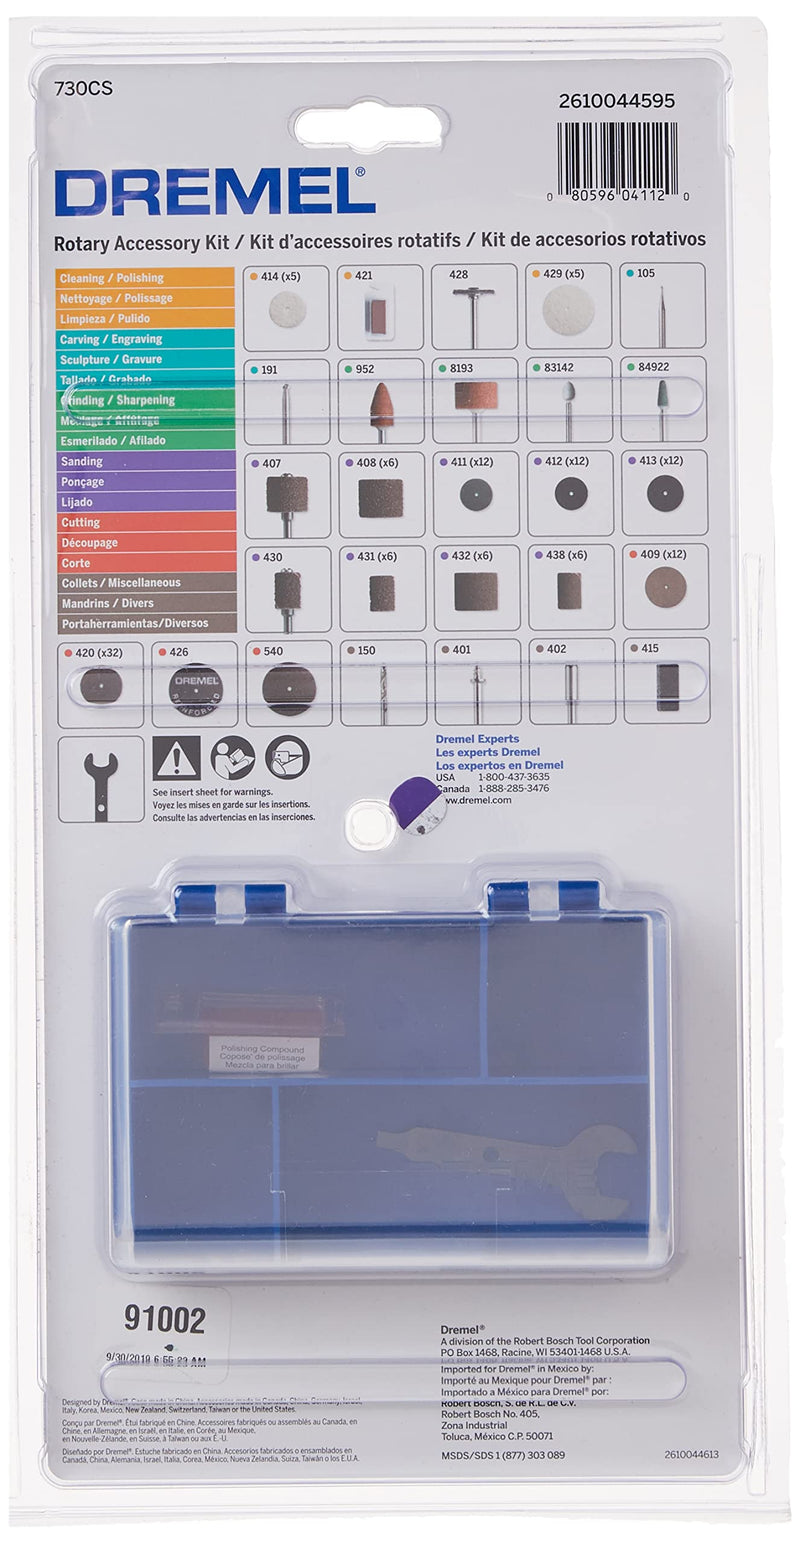 Dremel 730CS 13-Piece Maker Rotary Tool Accessory Kit- Includes Carving Bits, Drill Bits, Sanding Drums and Discs, Grinding Stones, Buffing Wheels, Cutting Discs, and a Storage Case - NewNest Australia